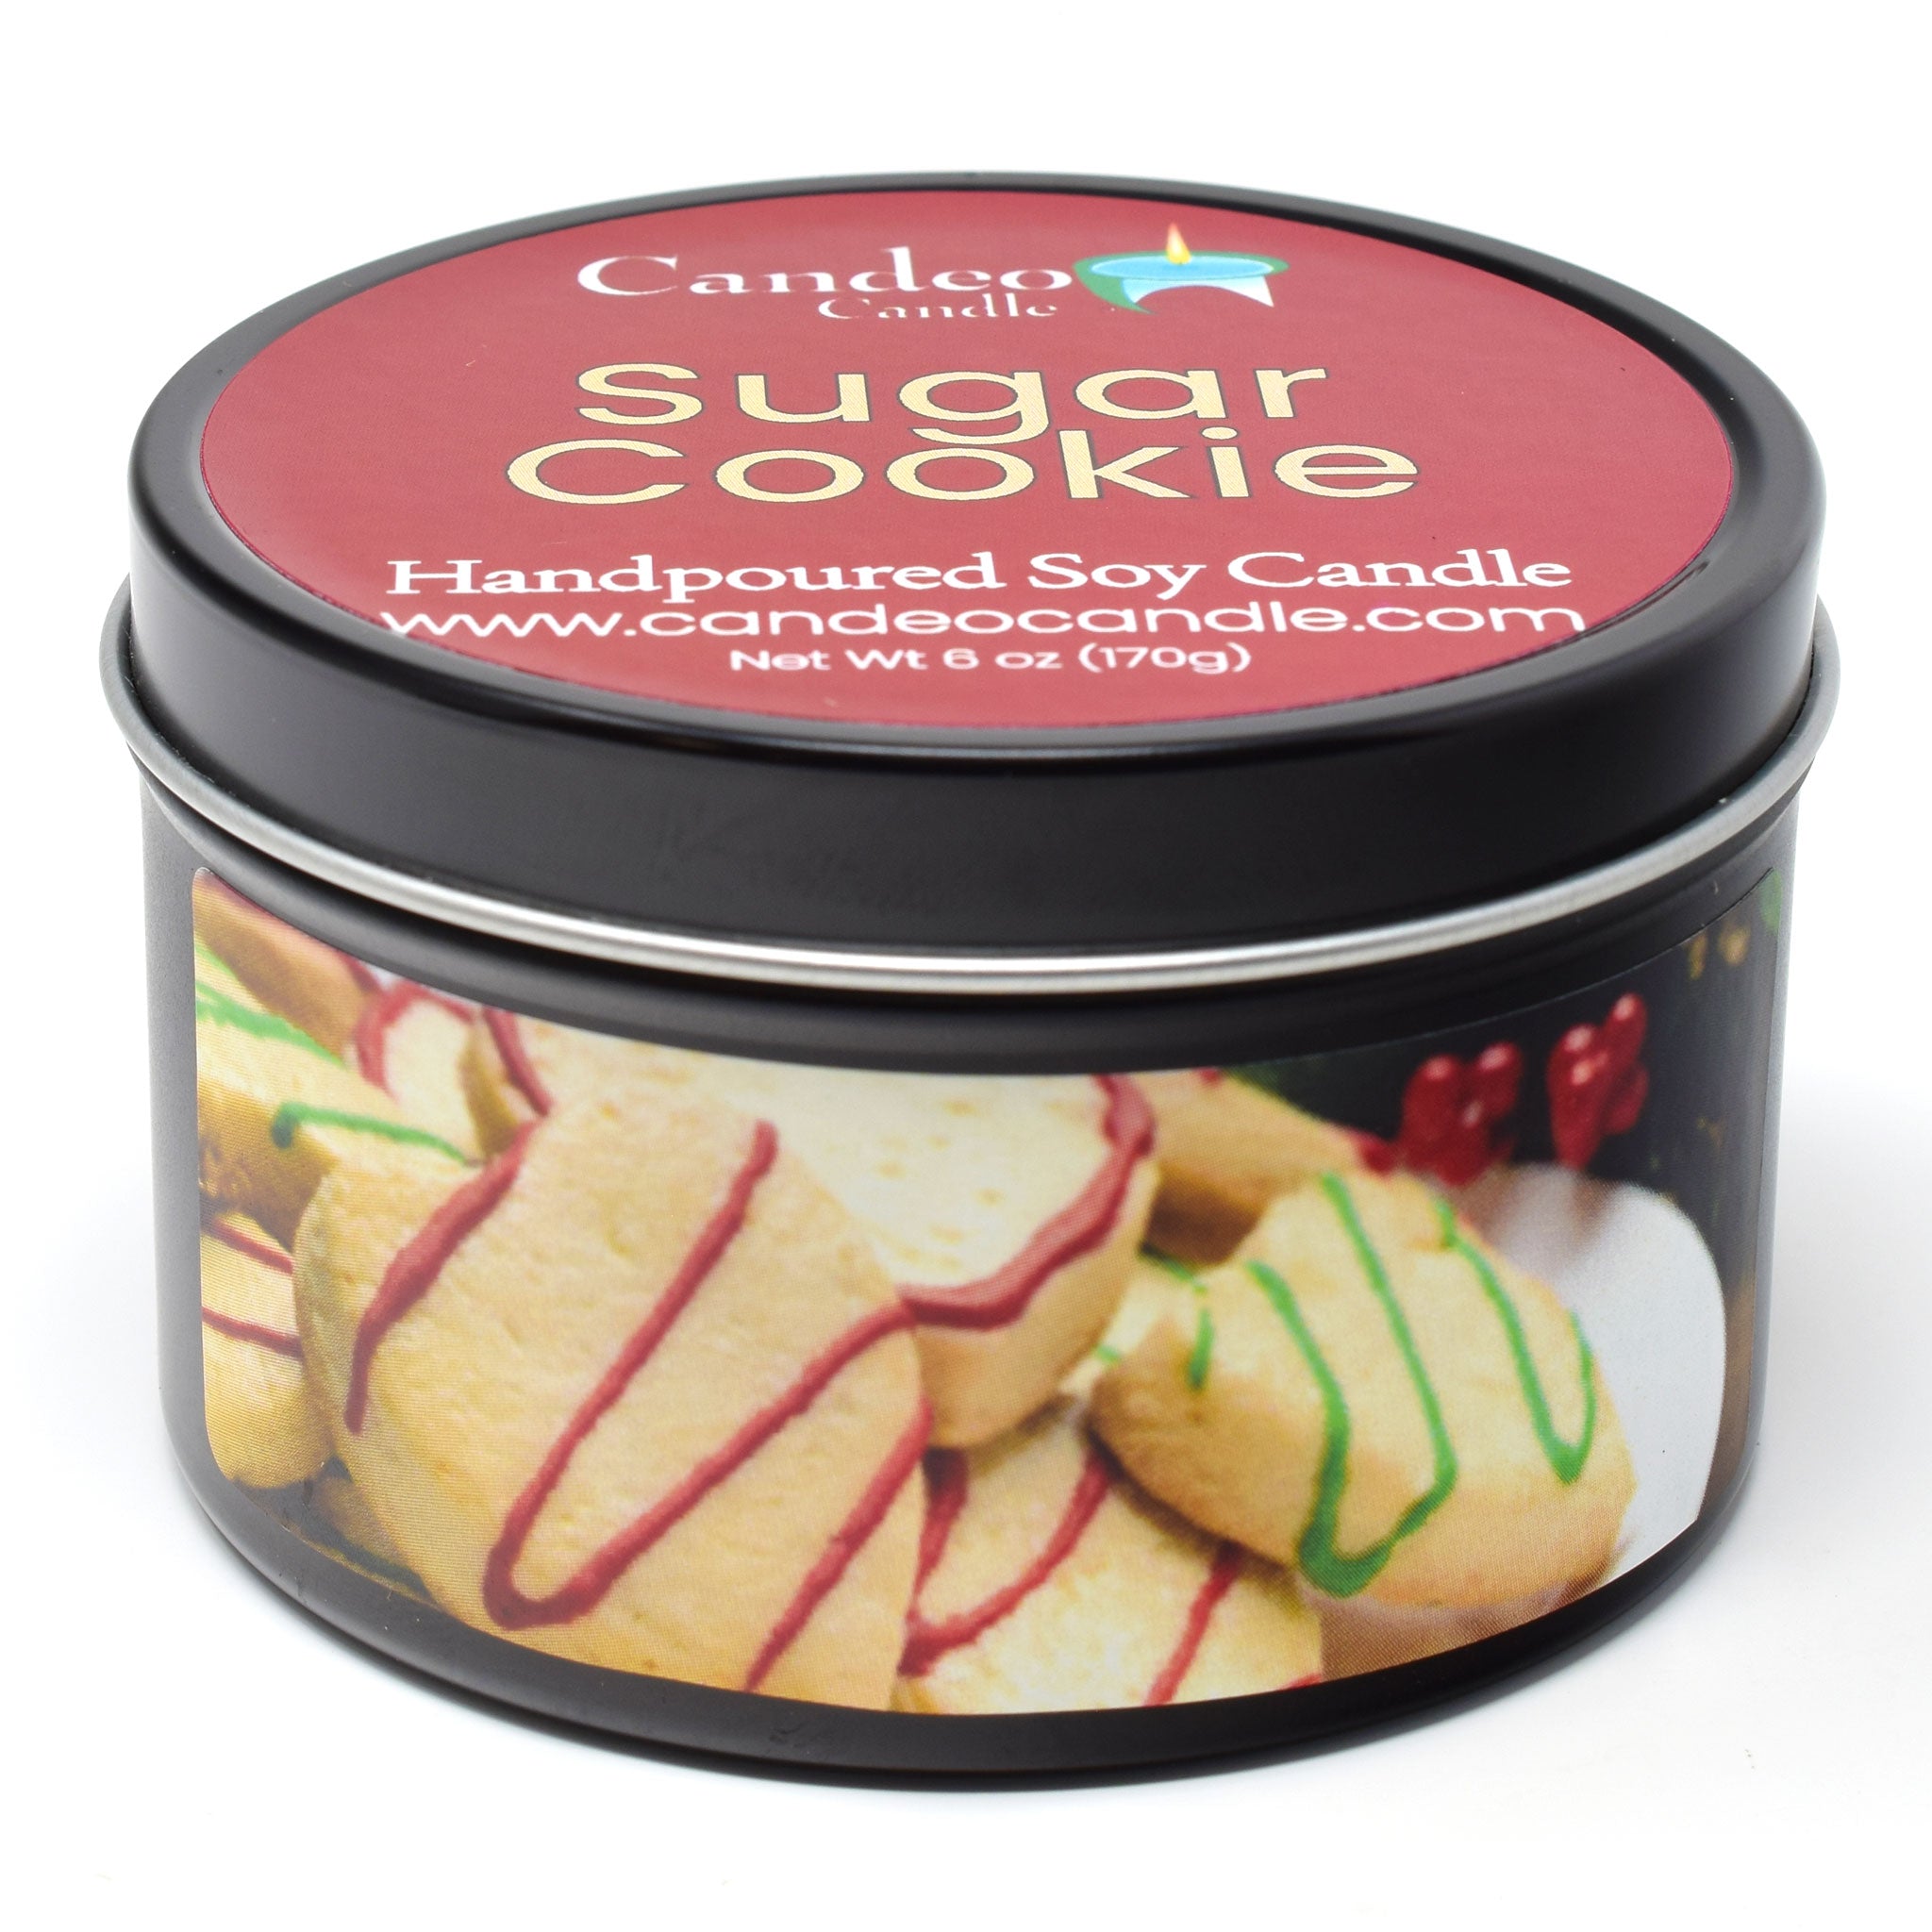 Sugar Cookie, 6oz Soy Candle Tin